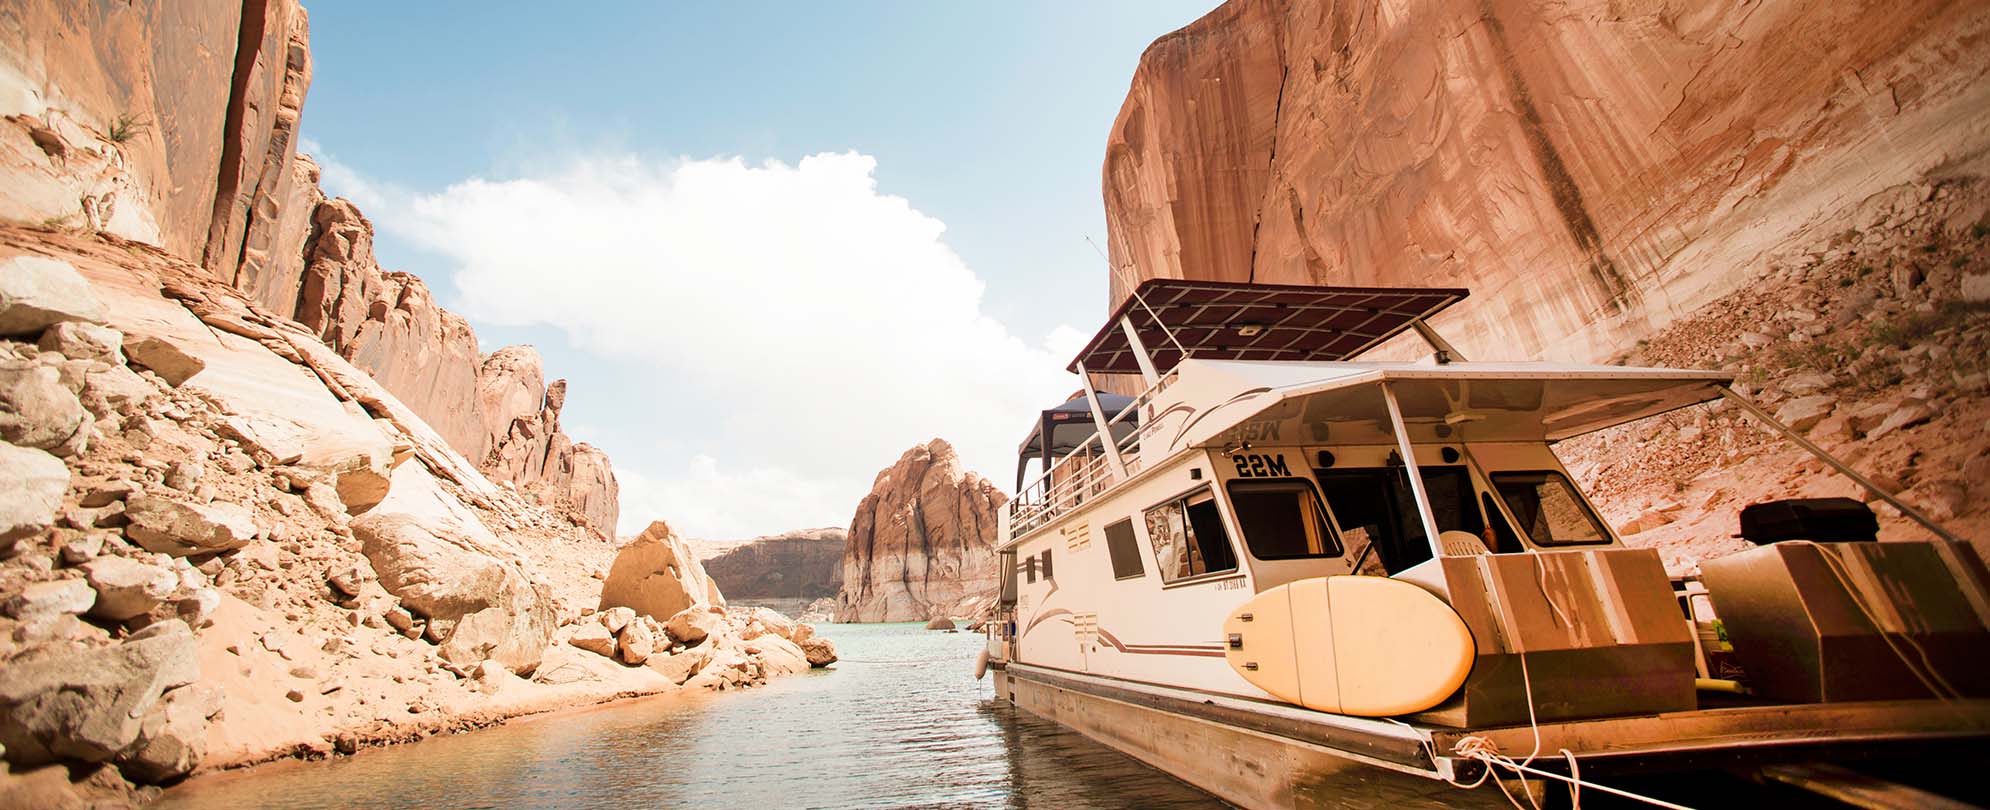 A houseboat floating by red rocks.